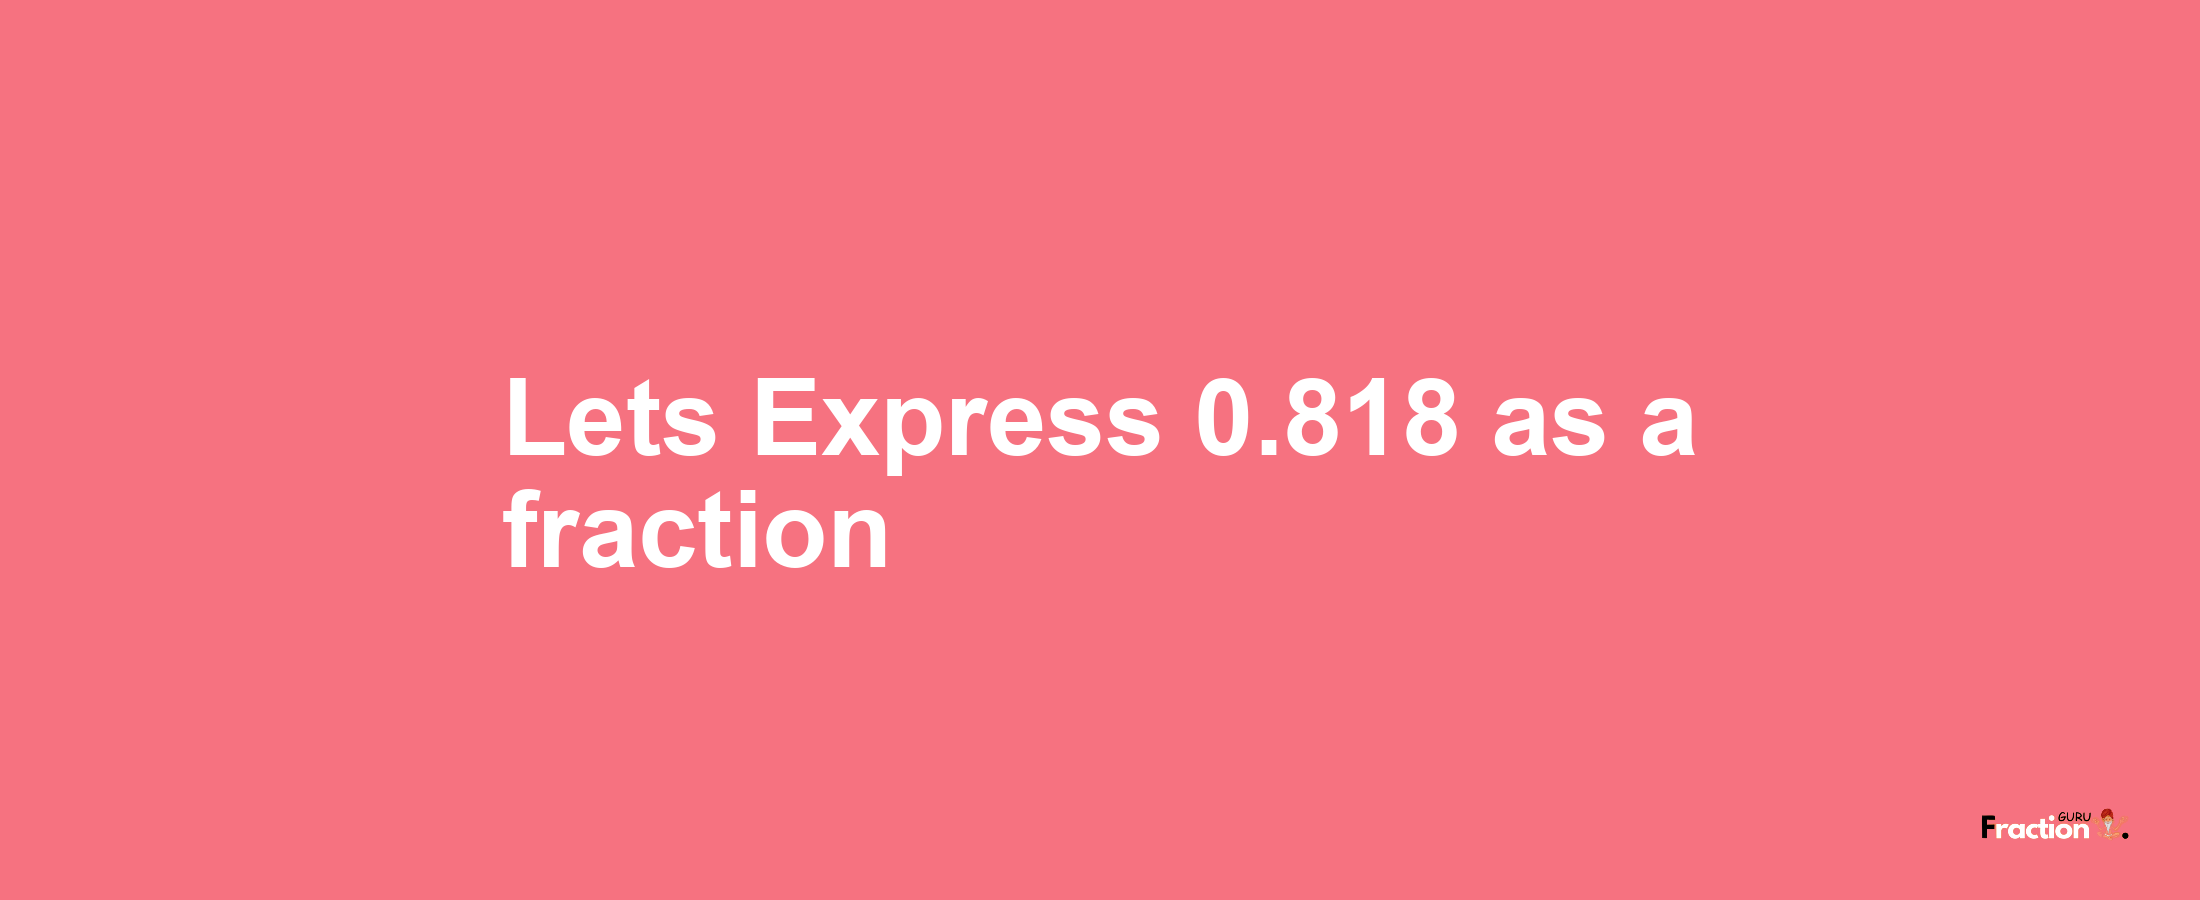 Lets Express 0.818 as afraction